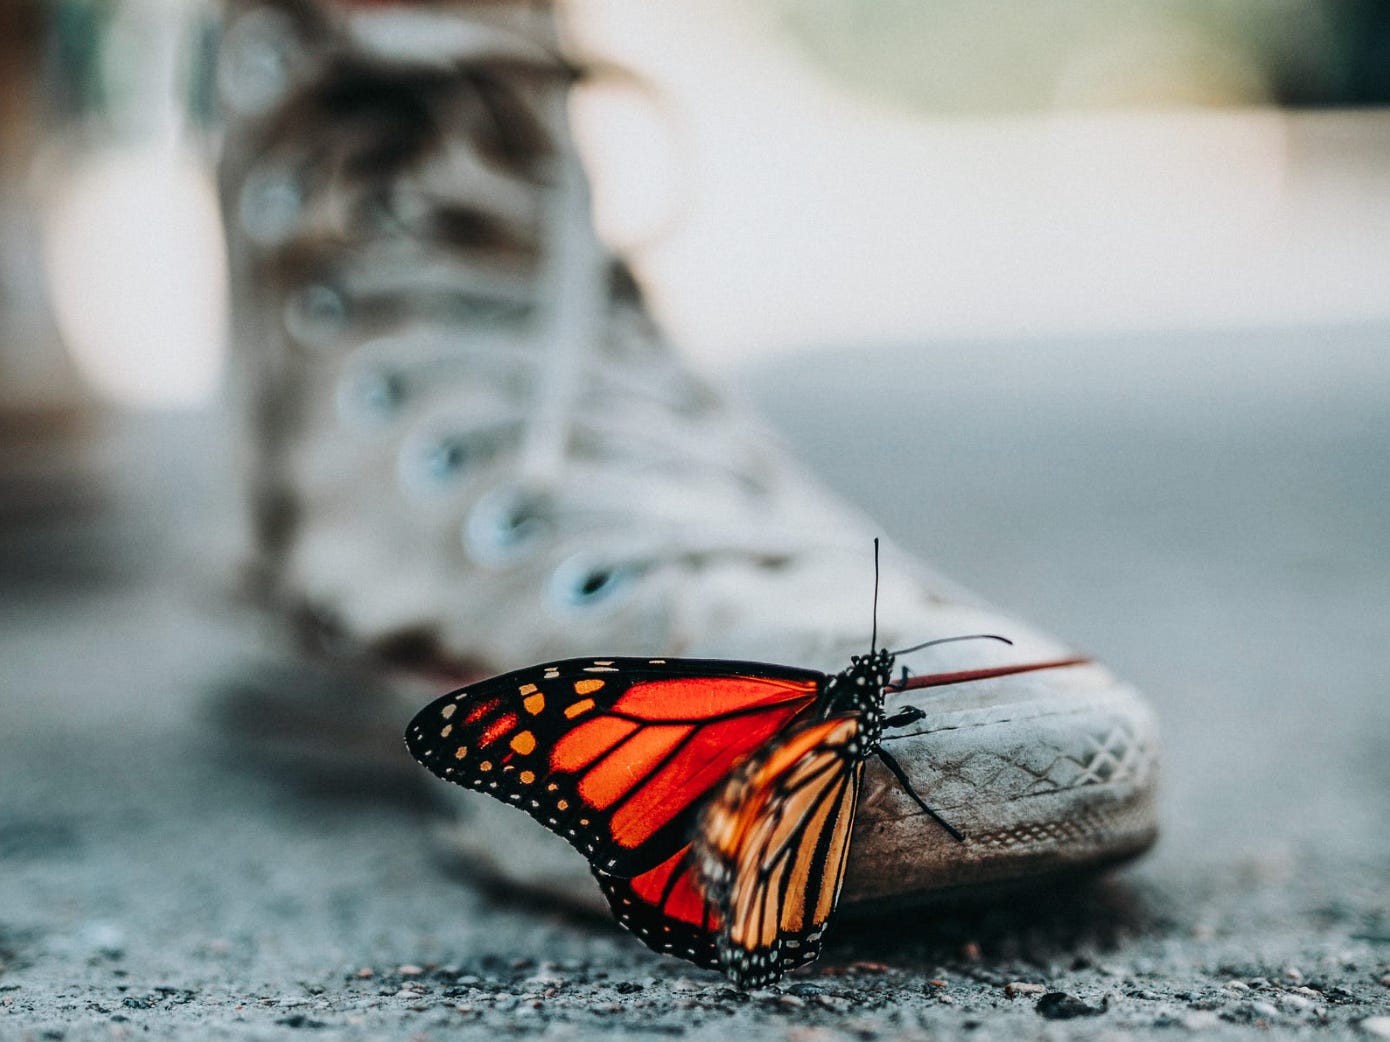 A narrow depth of field photograph showing the foot of a person wearing a dirty white hightop sneaker, standing on a gravelly grey surface. There’s a brilliant orange and black butterfly perched on the toe of the shoe.